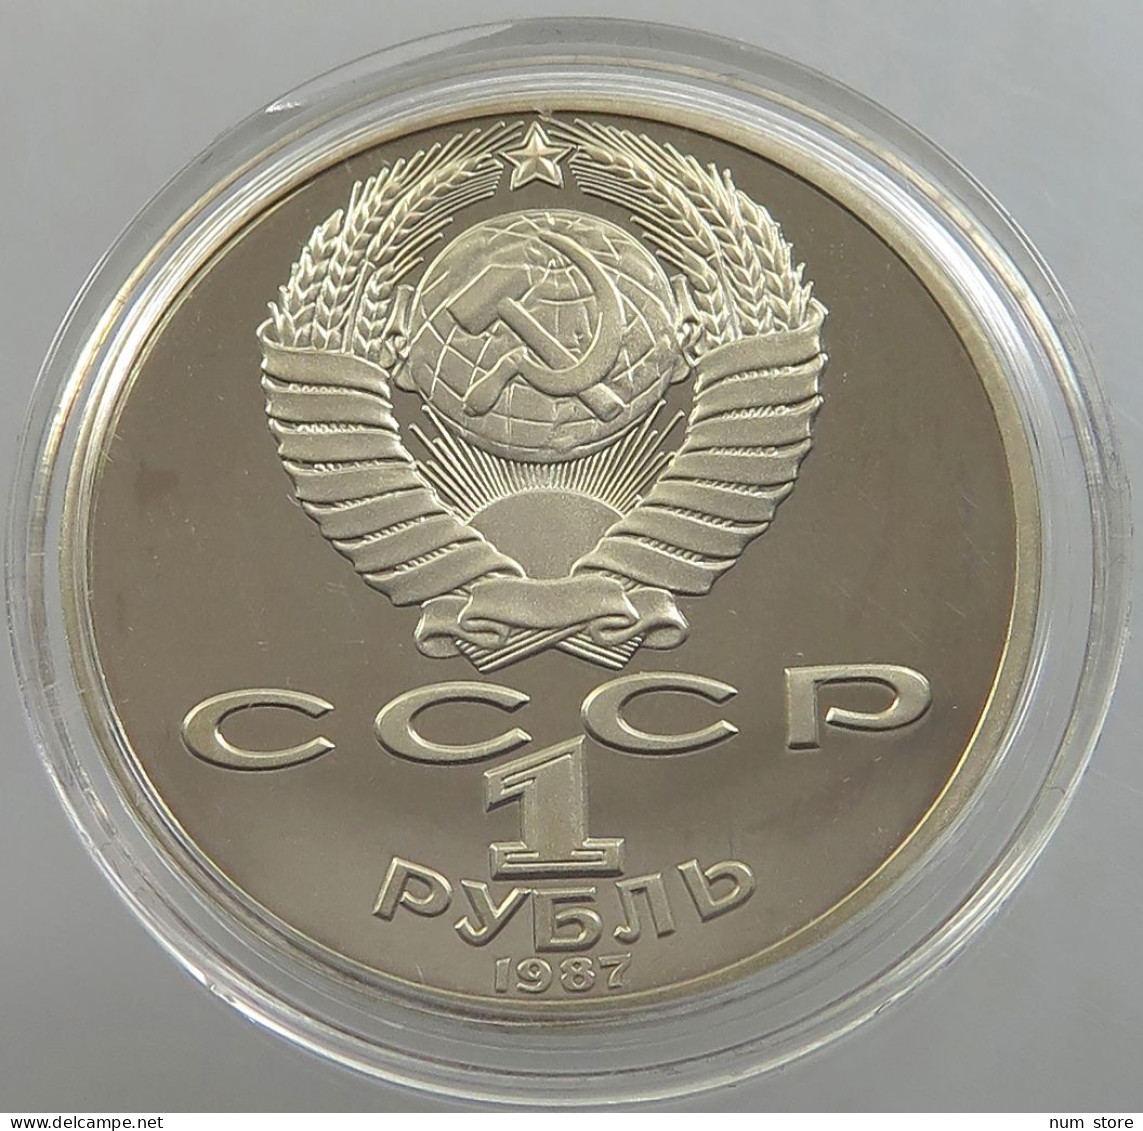 RUSSIA USSR 1 ROUBLE 1987 Tsiolkovsky PROOF #sm14 0645 - Rusland